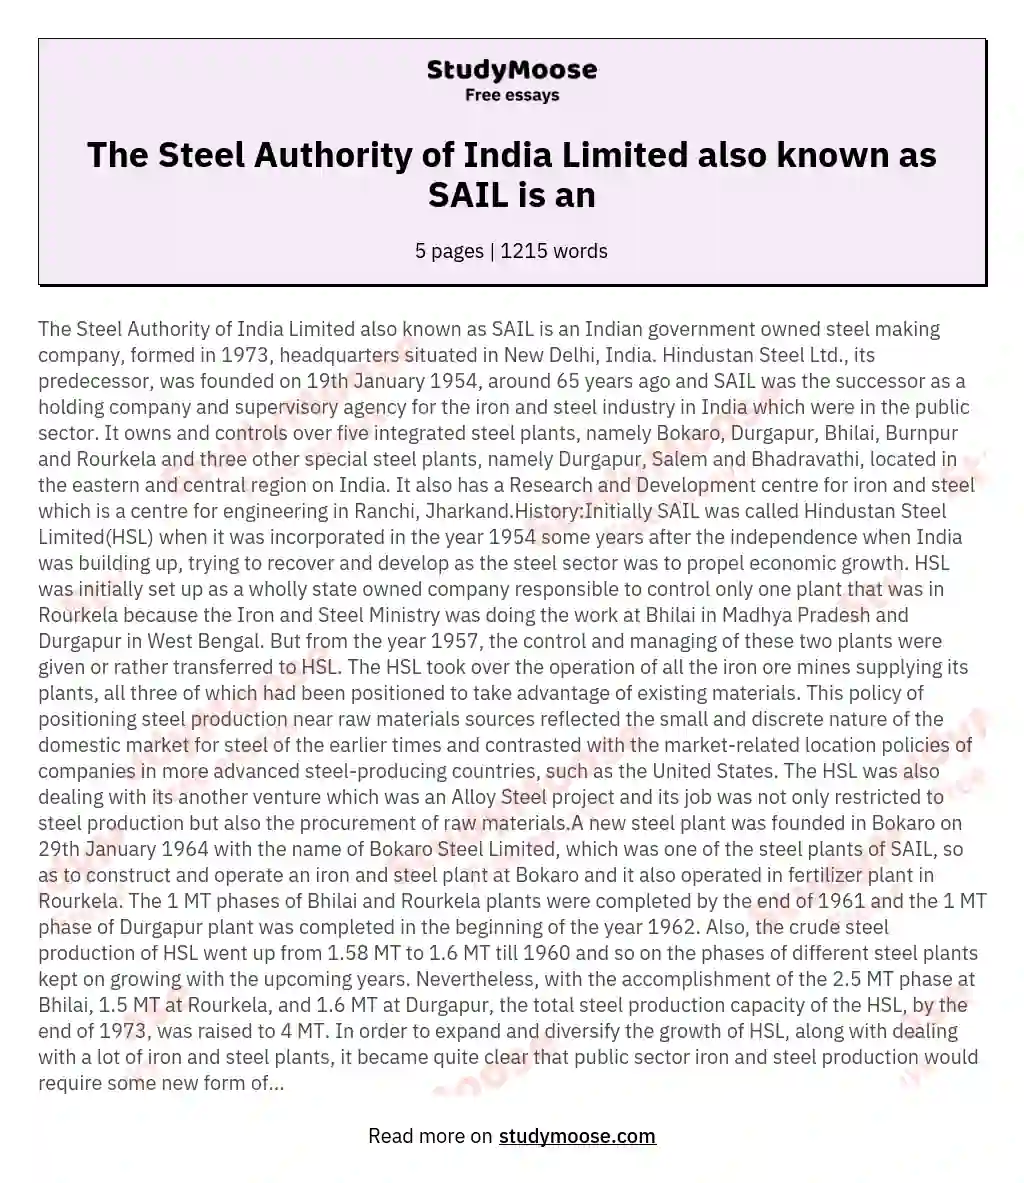 The Steel Authority of India Limited also known as SAIL is an